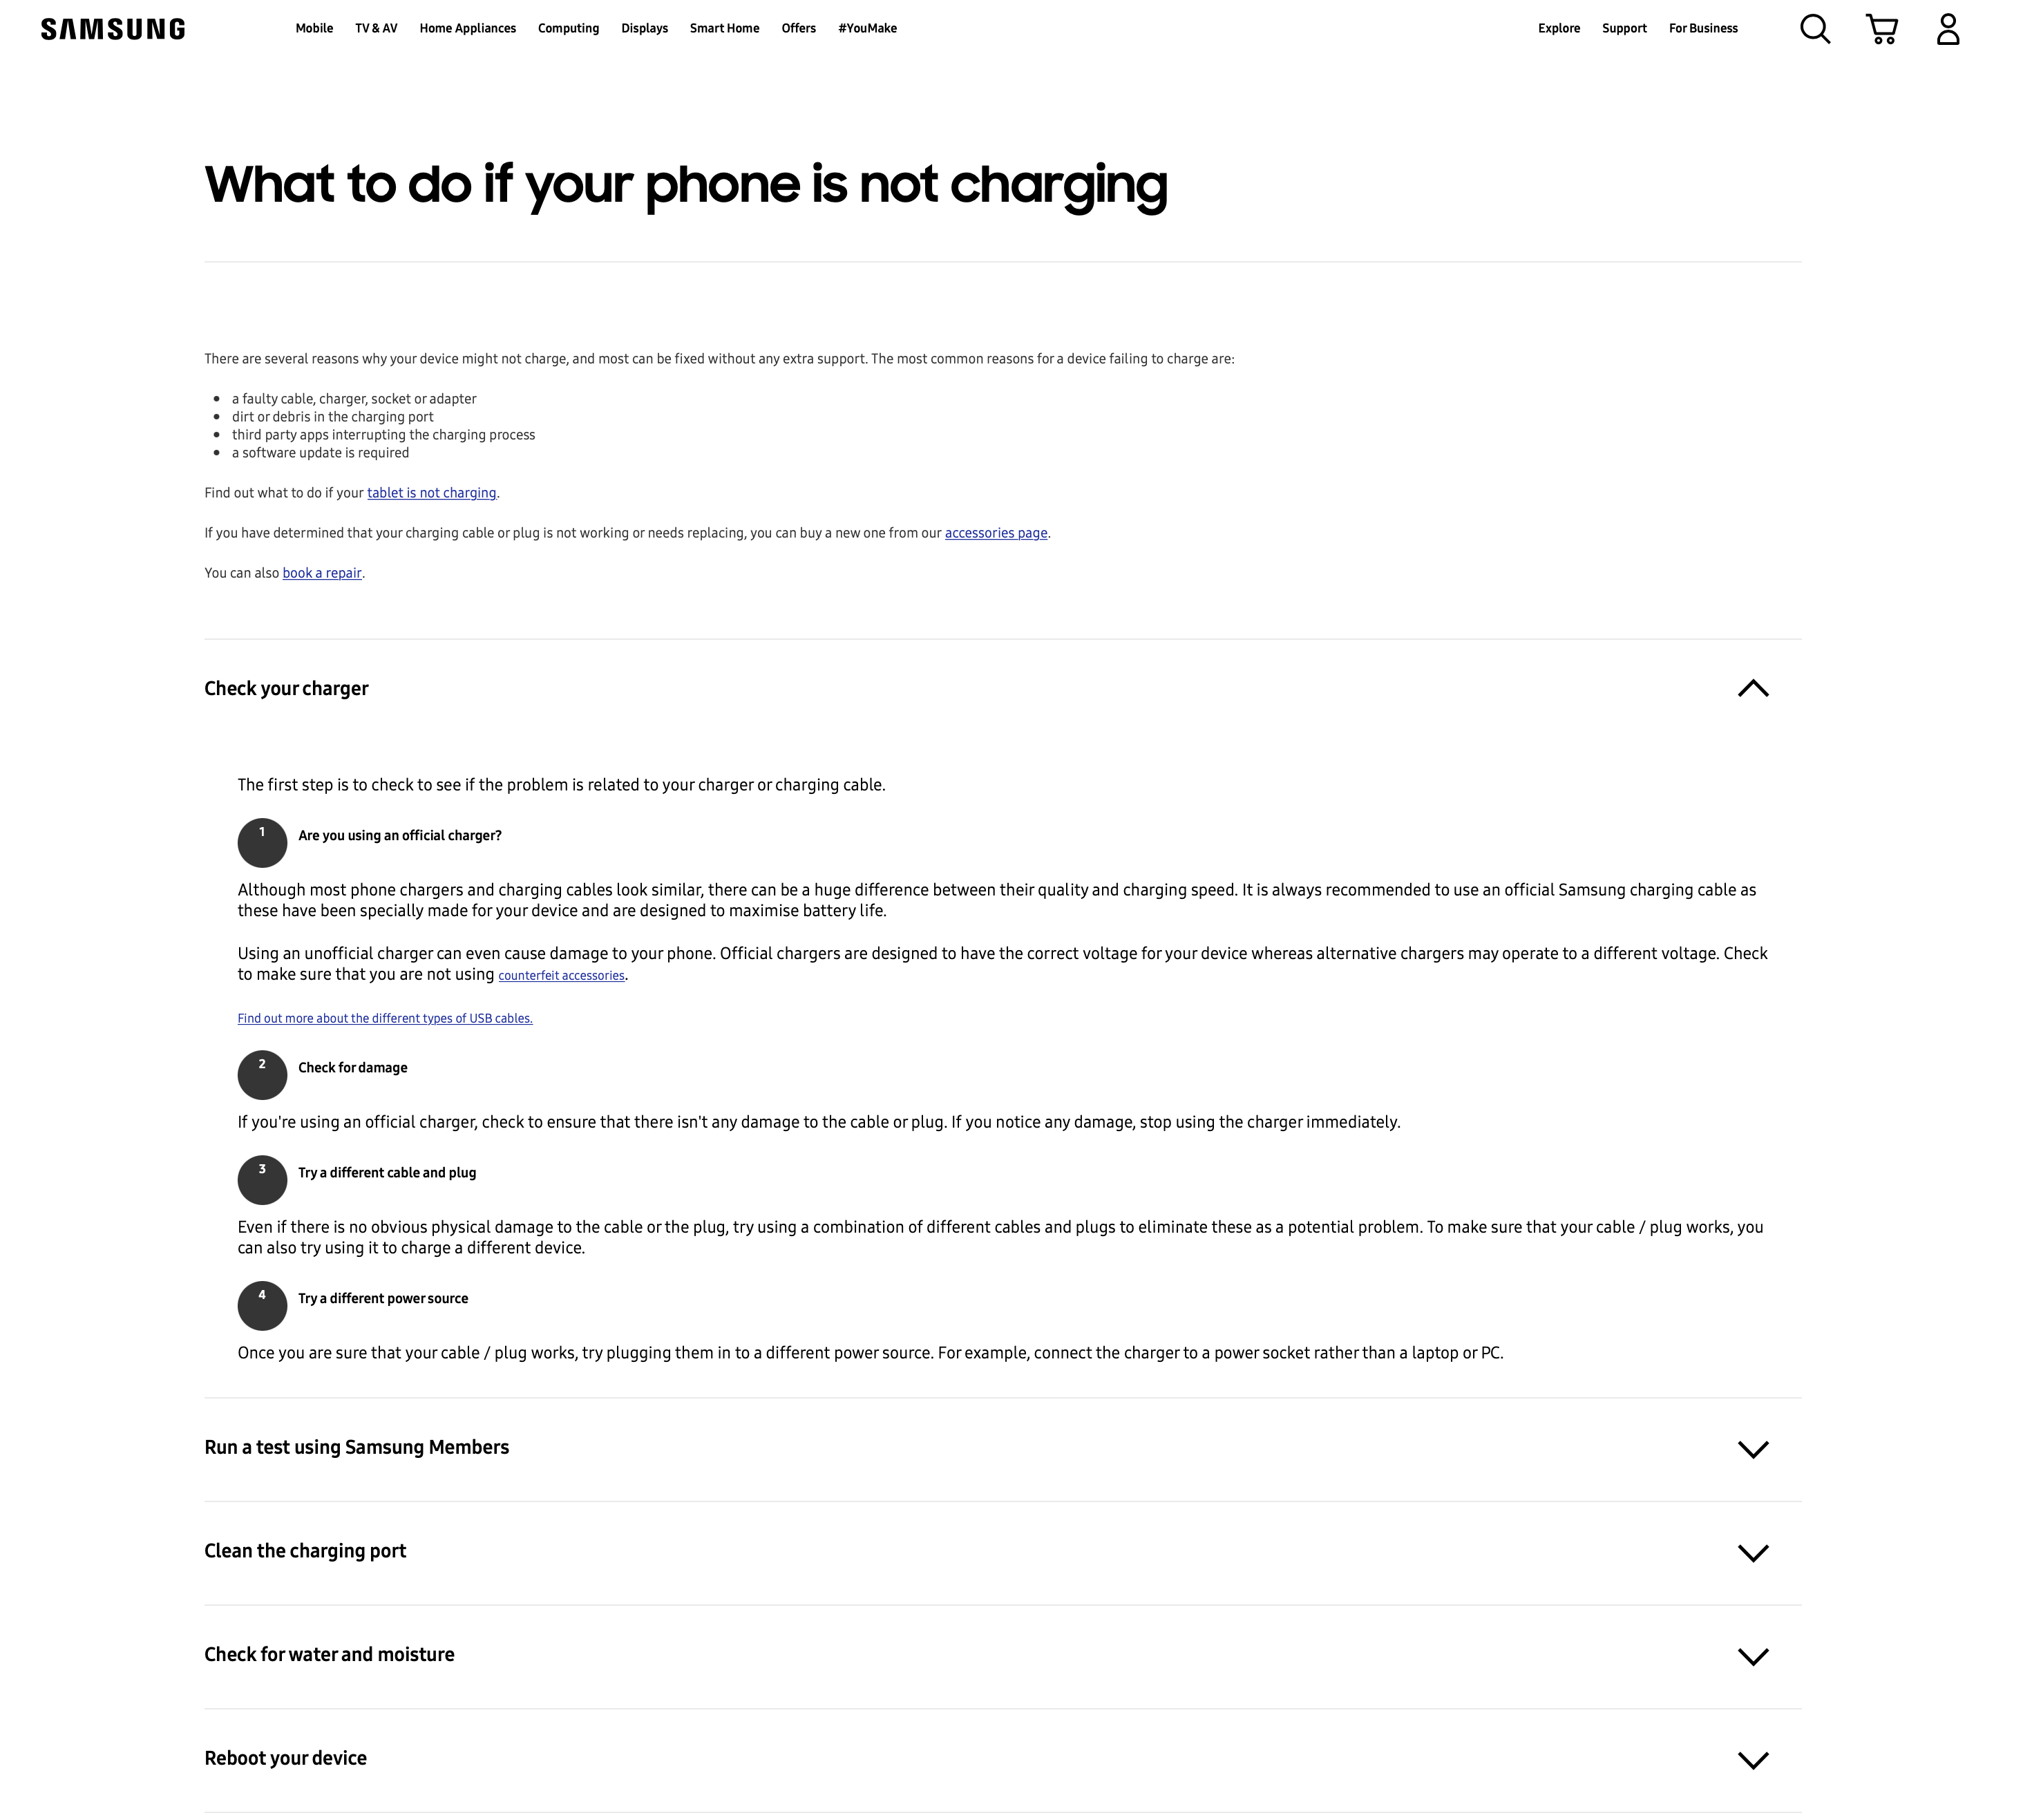 Samsung's FAQ page online for Customers